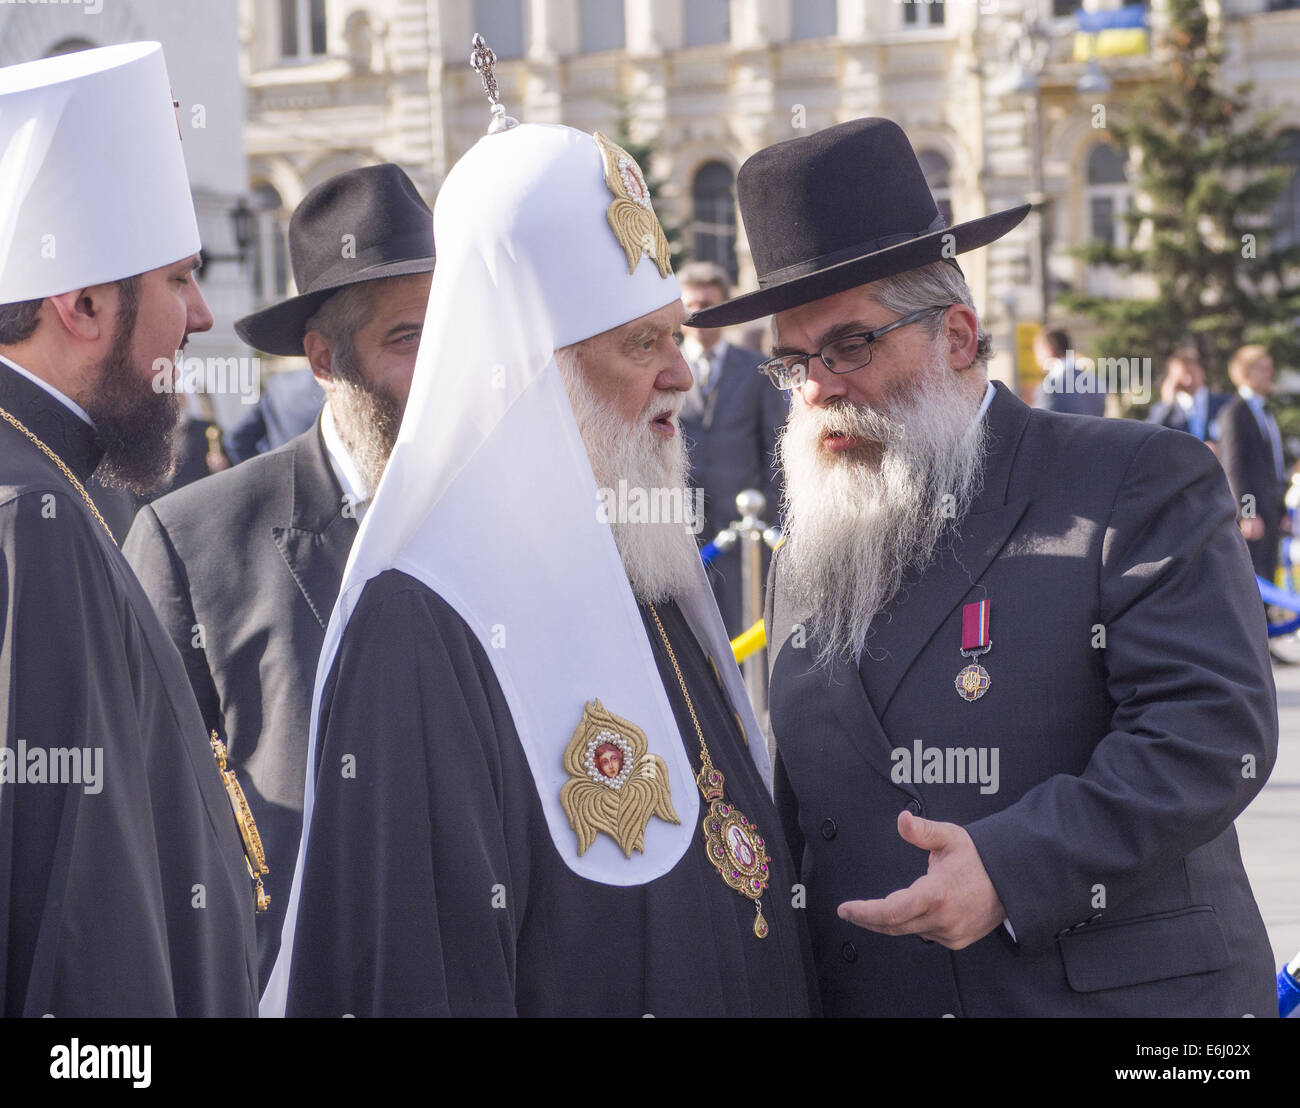 Kiev, Ukraine. 24th Aug, 2014. Primate of the Ukrainian Orthodox Church Patriarch Filaret talks with Chief Rabbi of Kiev and Ukraine Yaakov Dov Bleich -- In Kiev, the first time in five years, was the official military parade. The sixth in the history of independent Ukraine. In the parade was attended by members of the armed forces and was featured modern military equipment. Credit:  Igor Golovniov/ZUMA Wire/Alamy Live News Stock Photo